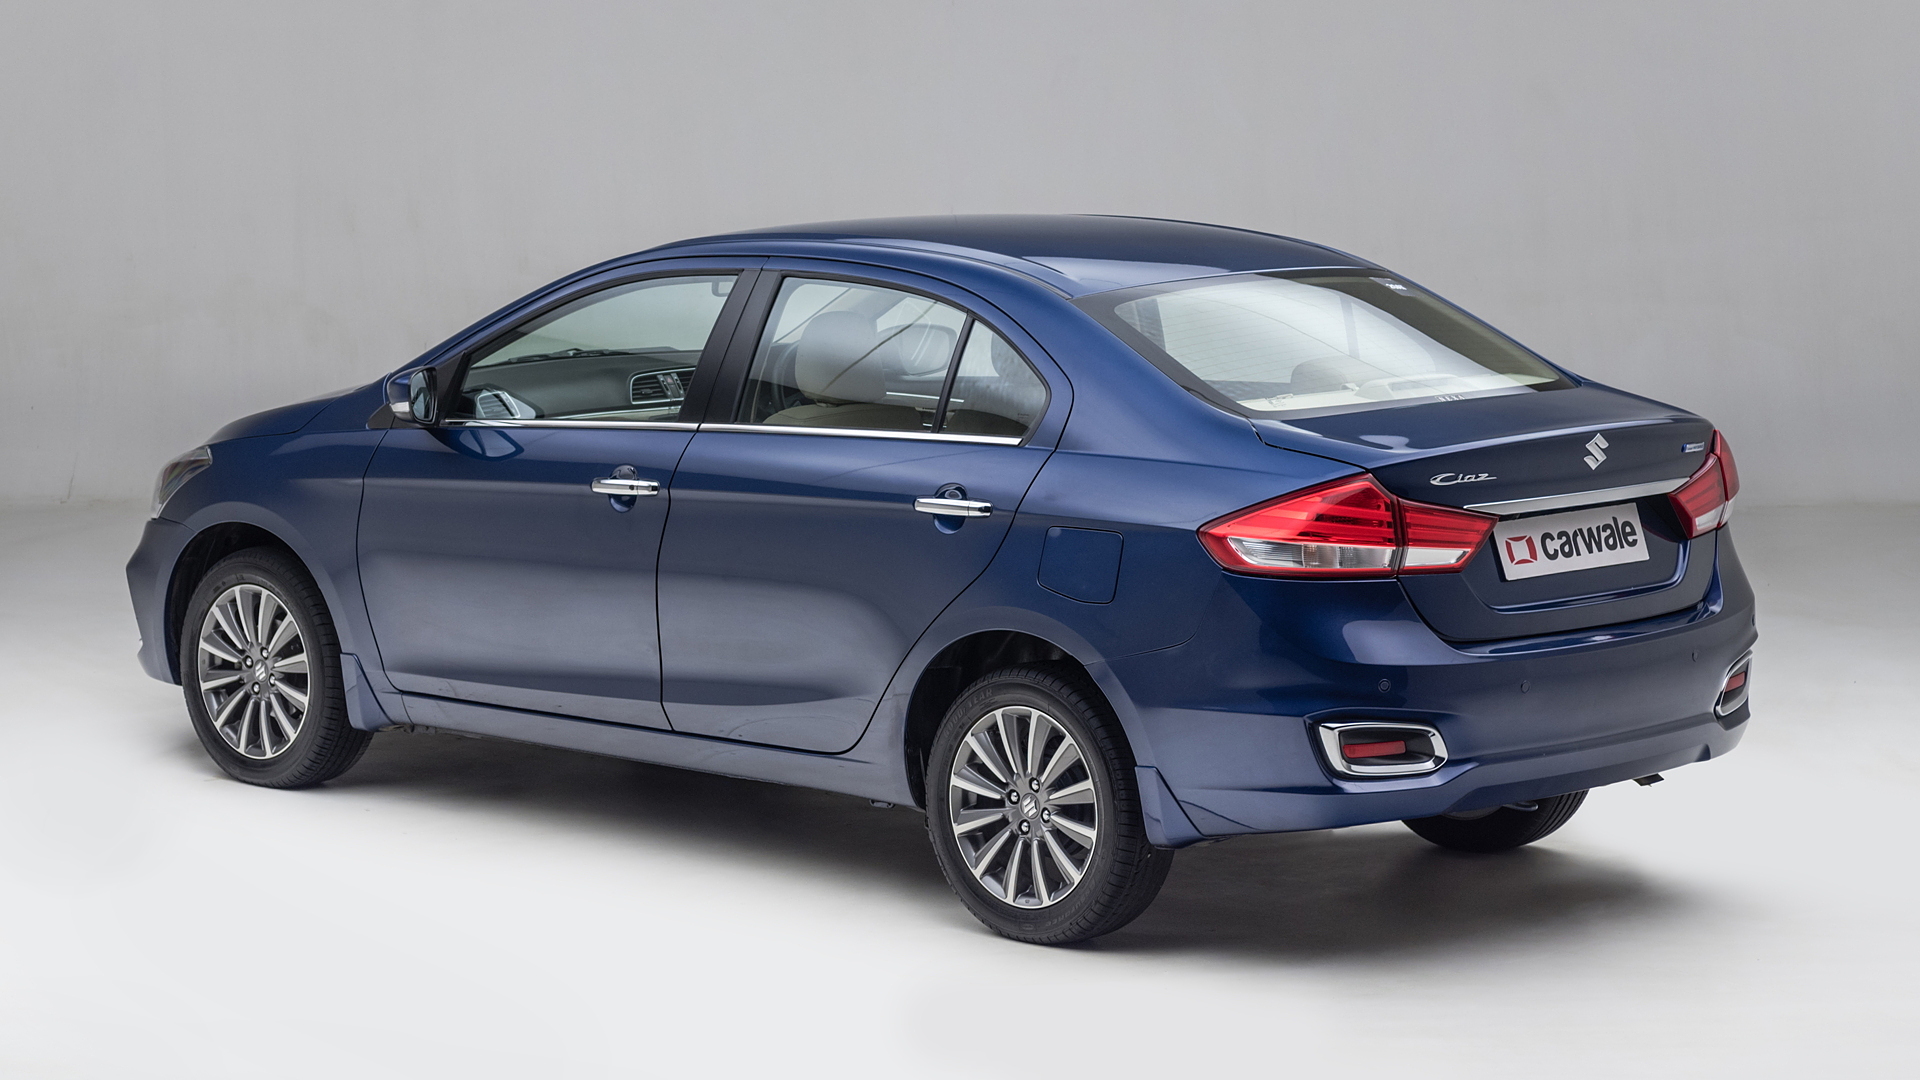 Ciaz Images Interior Exterior Photo Gallery Carwale